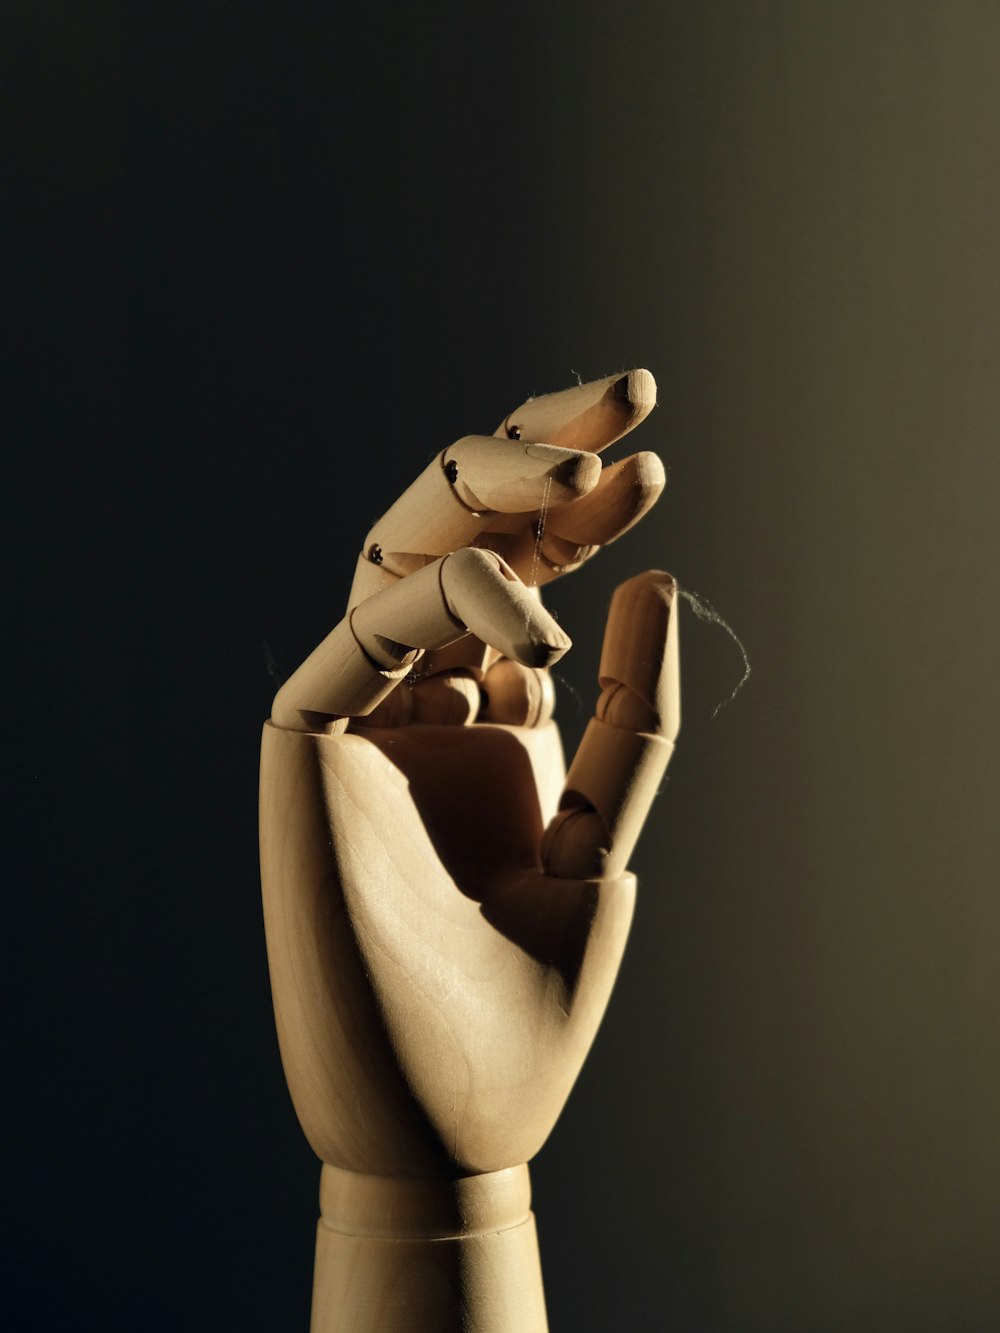 A wooden sculpture of a hand holding a doll photo – Free Art Image